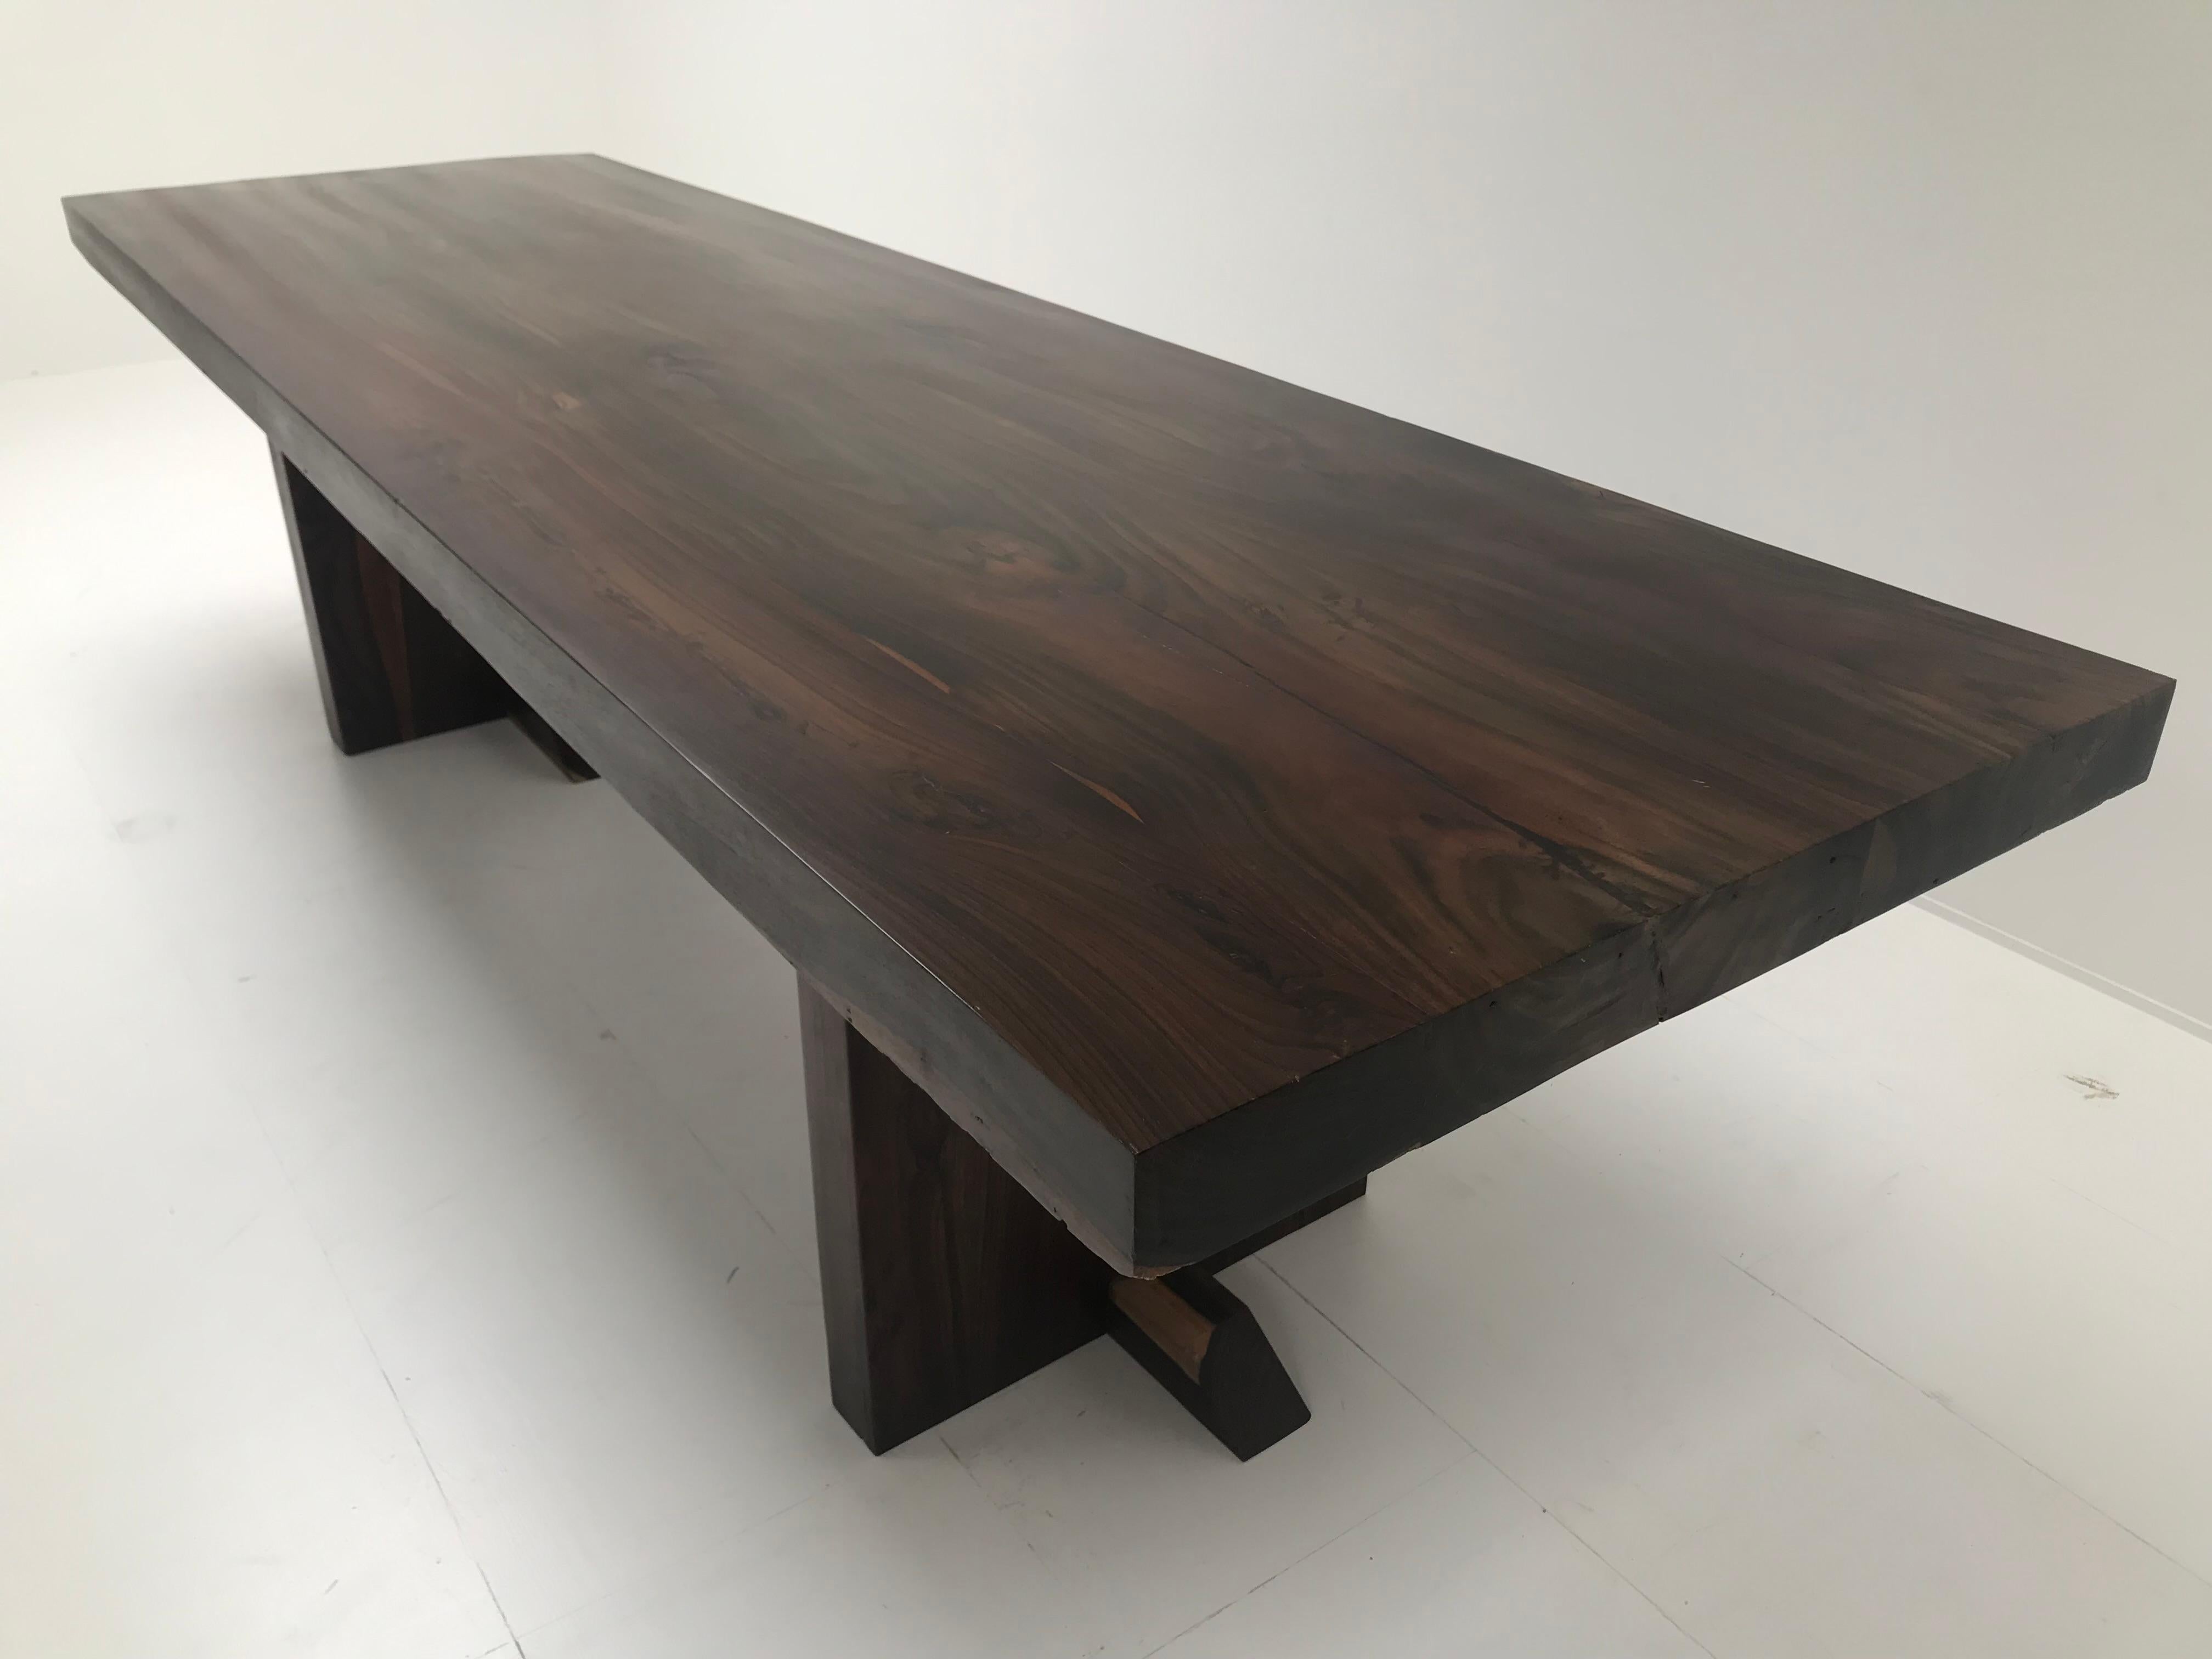 Modern, Contemporary Rectangular Table In Excellent Condition For Sale In Schellebelle, BE